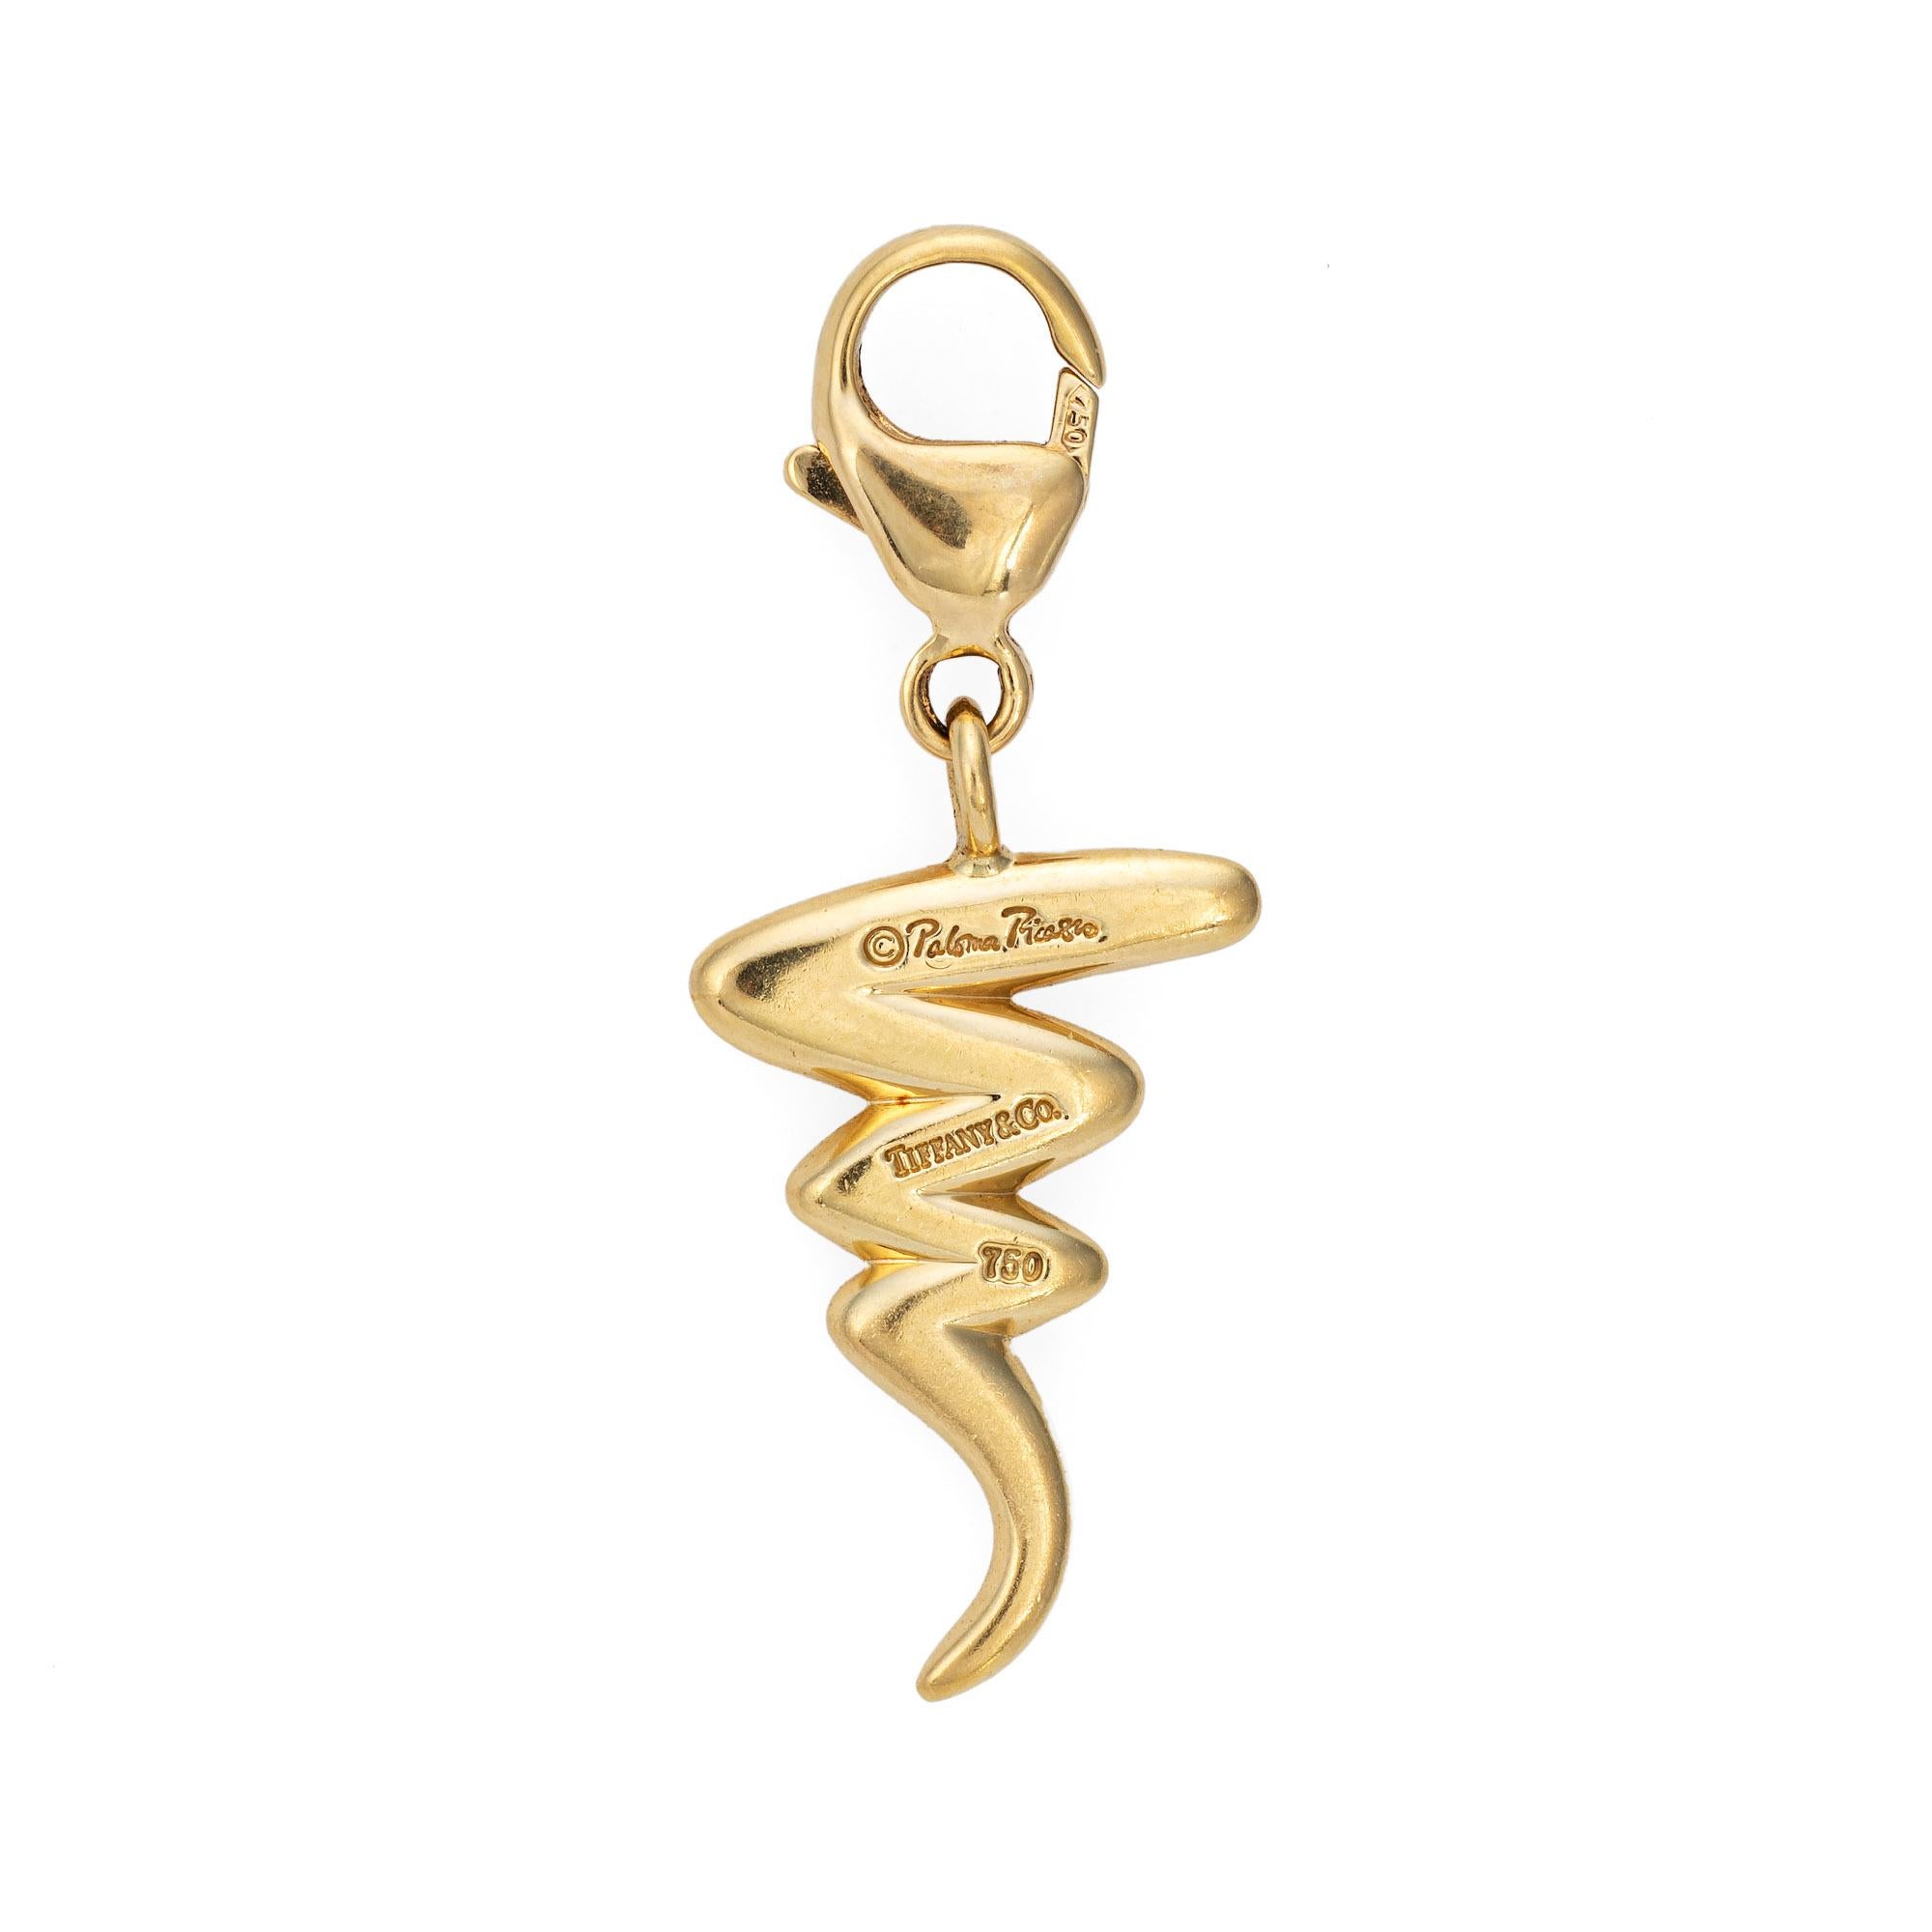 Finely detailed estate Tiffany & Co 'zig zag' charm designed by Paloma Picasso, crafted in 18 karat yellow gold.  

The charm is a hard-to-find retired piece and no longer made by Tiffany & Co. The 'zig zag' is a classic design by the famed Paloma